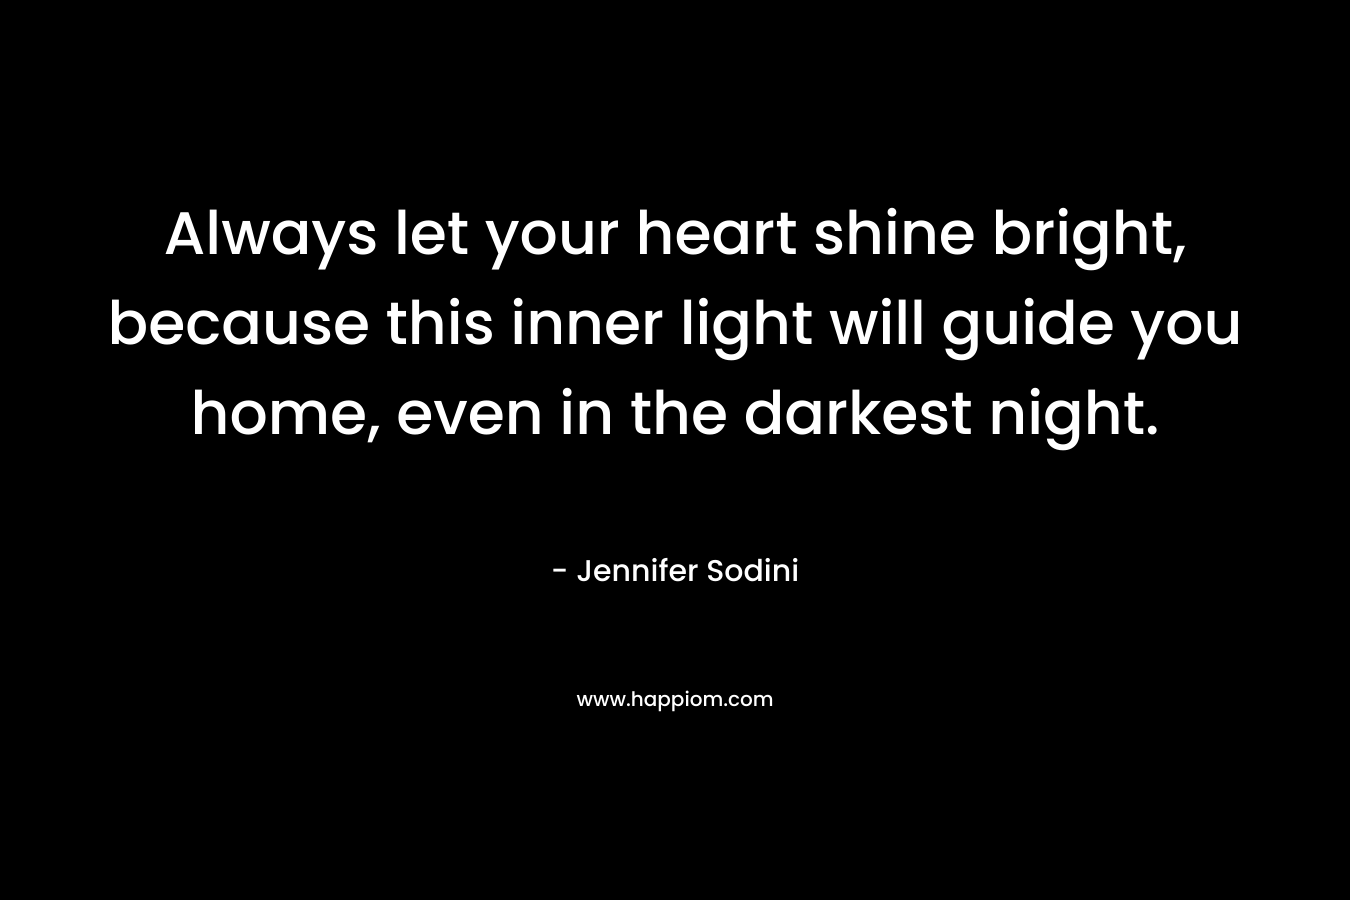 Always let your heart shine bright, because this inner light will guide you home, even in the darkest night.